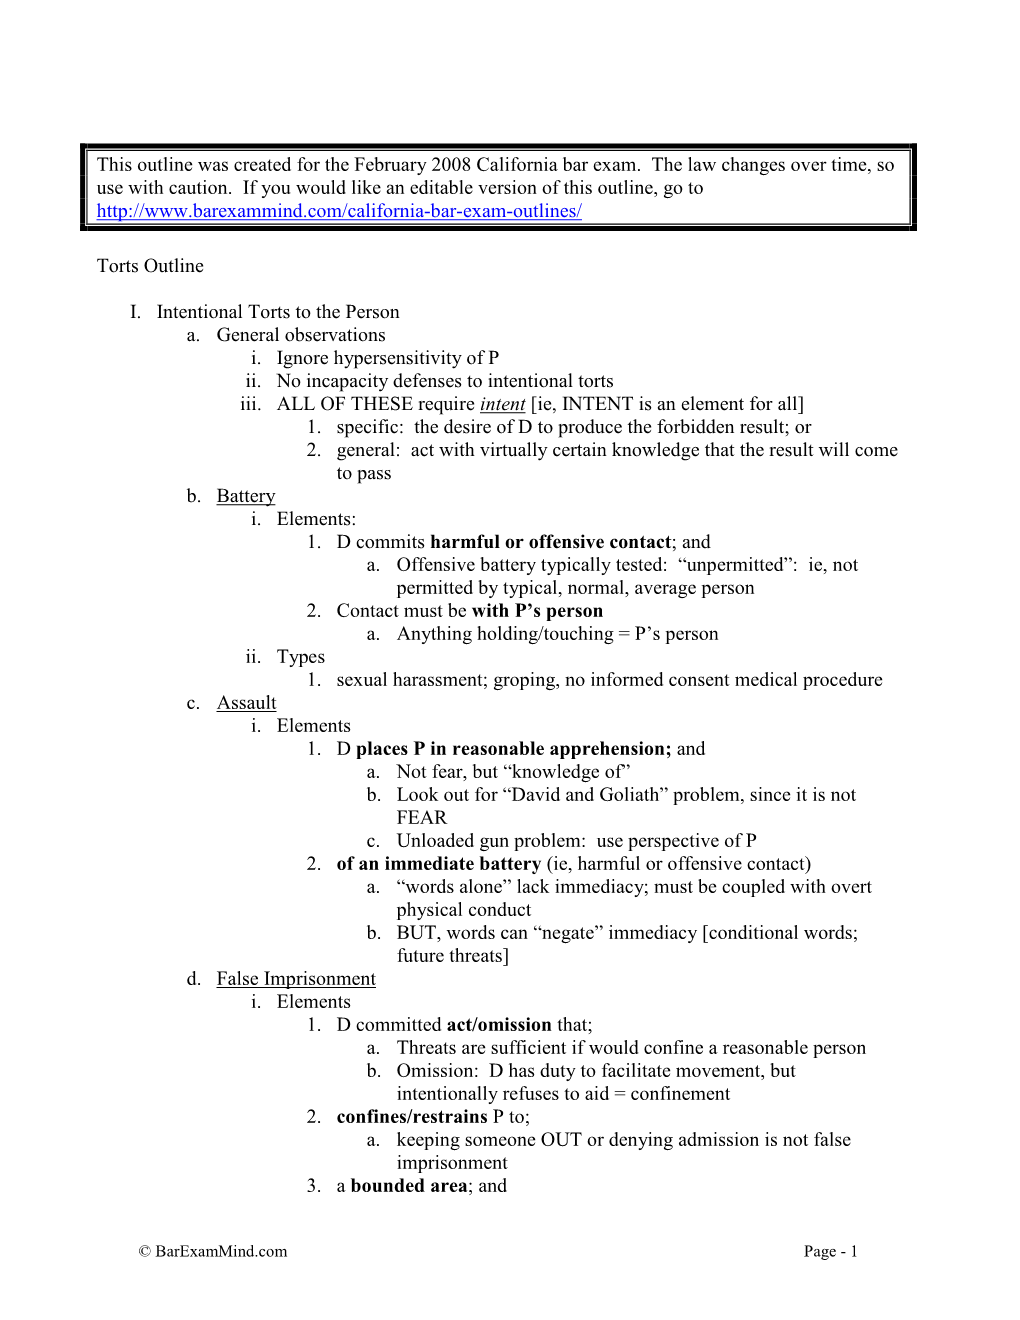 This Outline Was Created for the February 2008 California Bar Exam